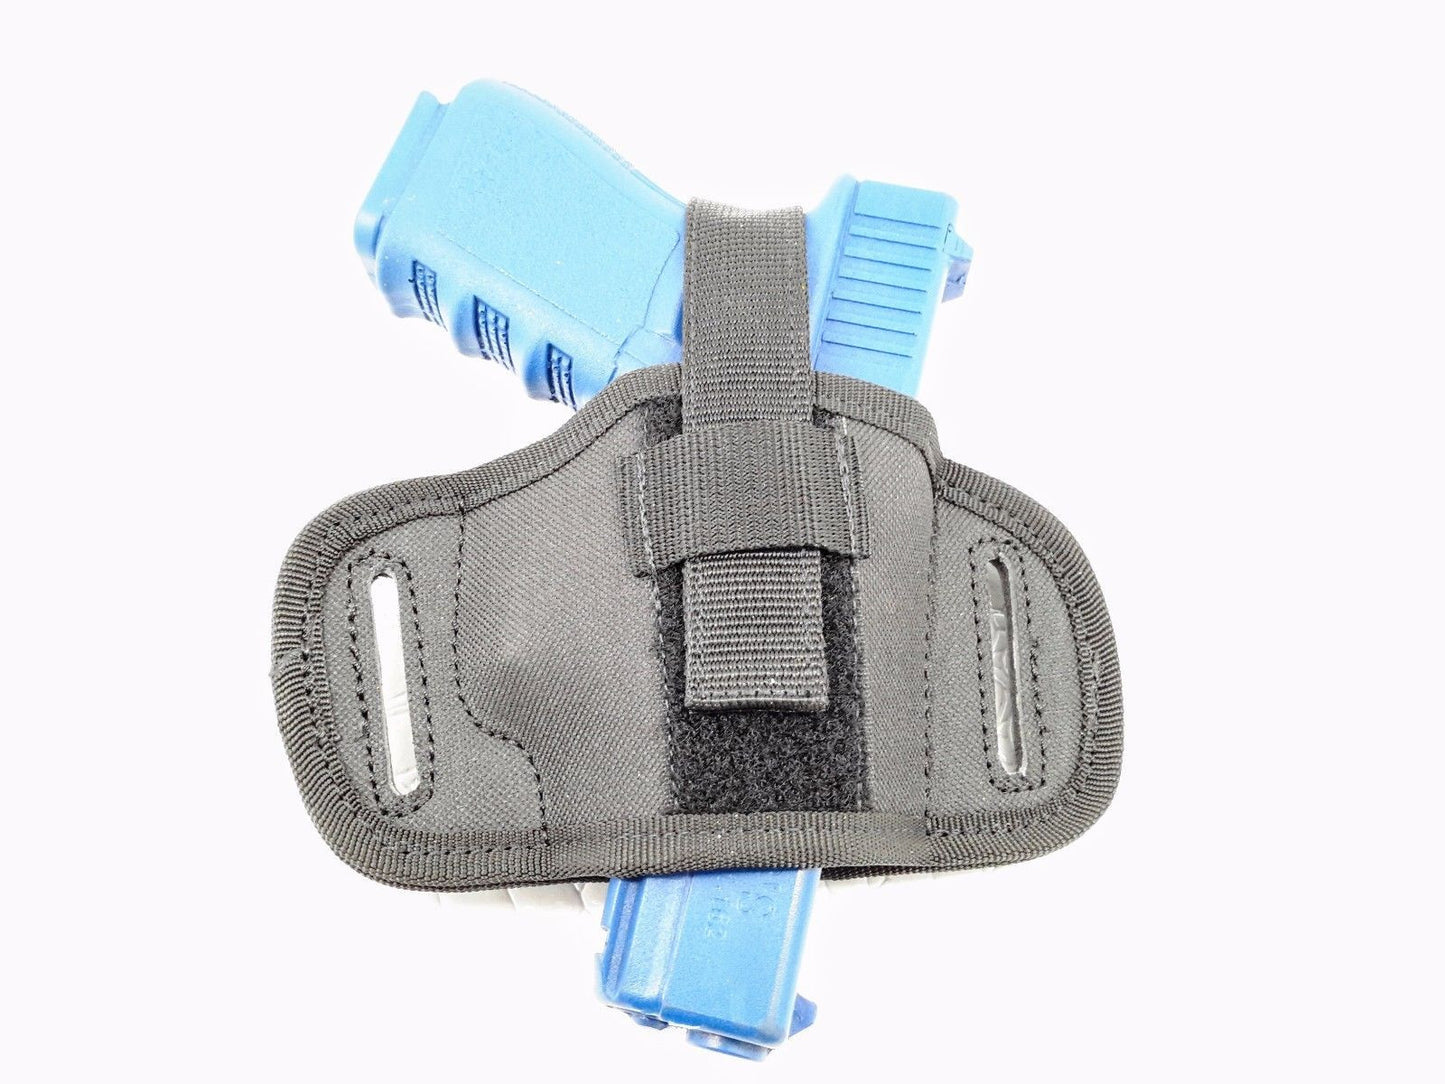 MyHolster (UNIFIT) Universal Fit Holster